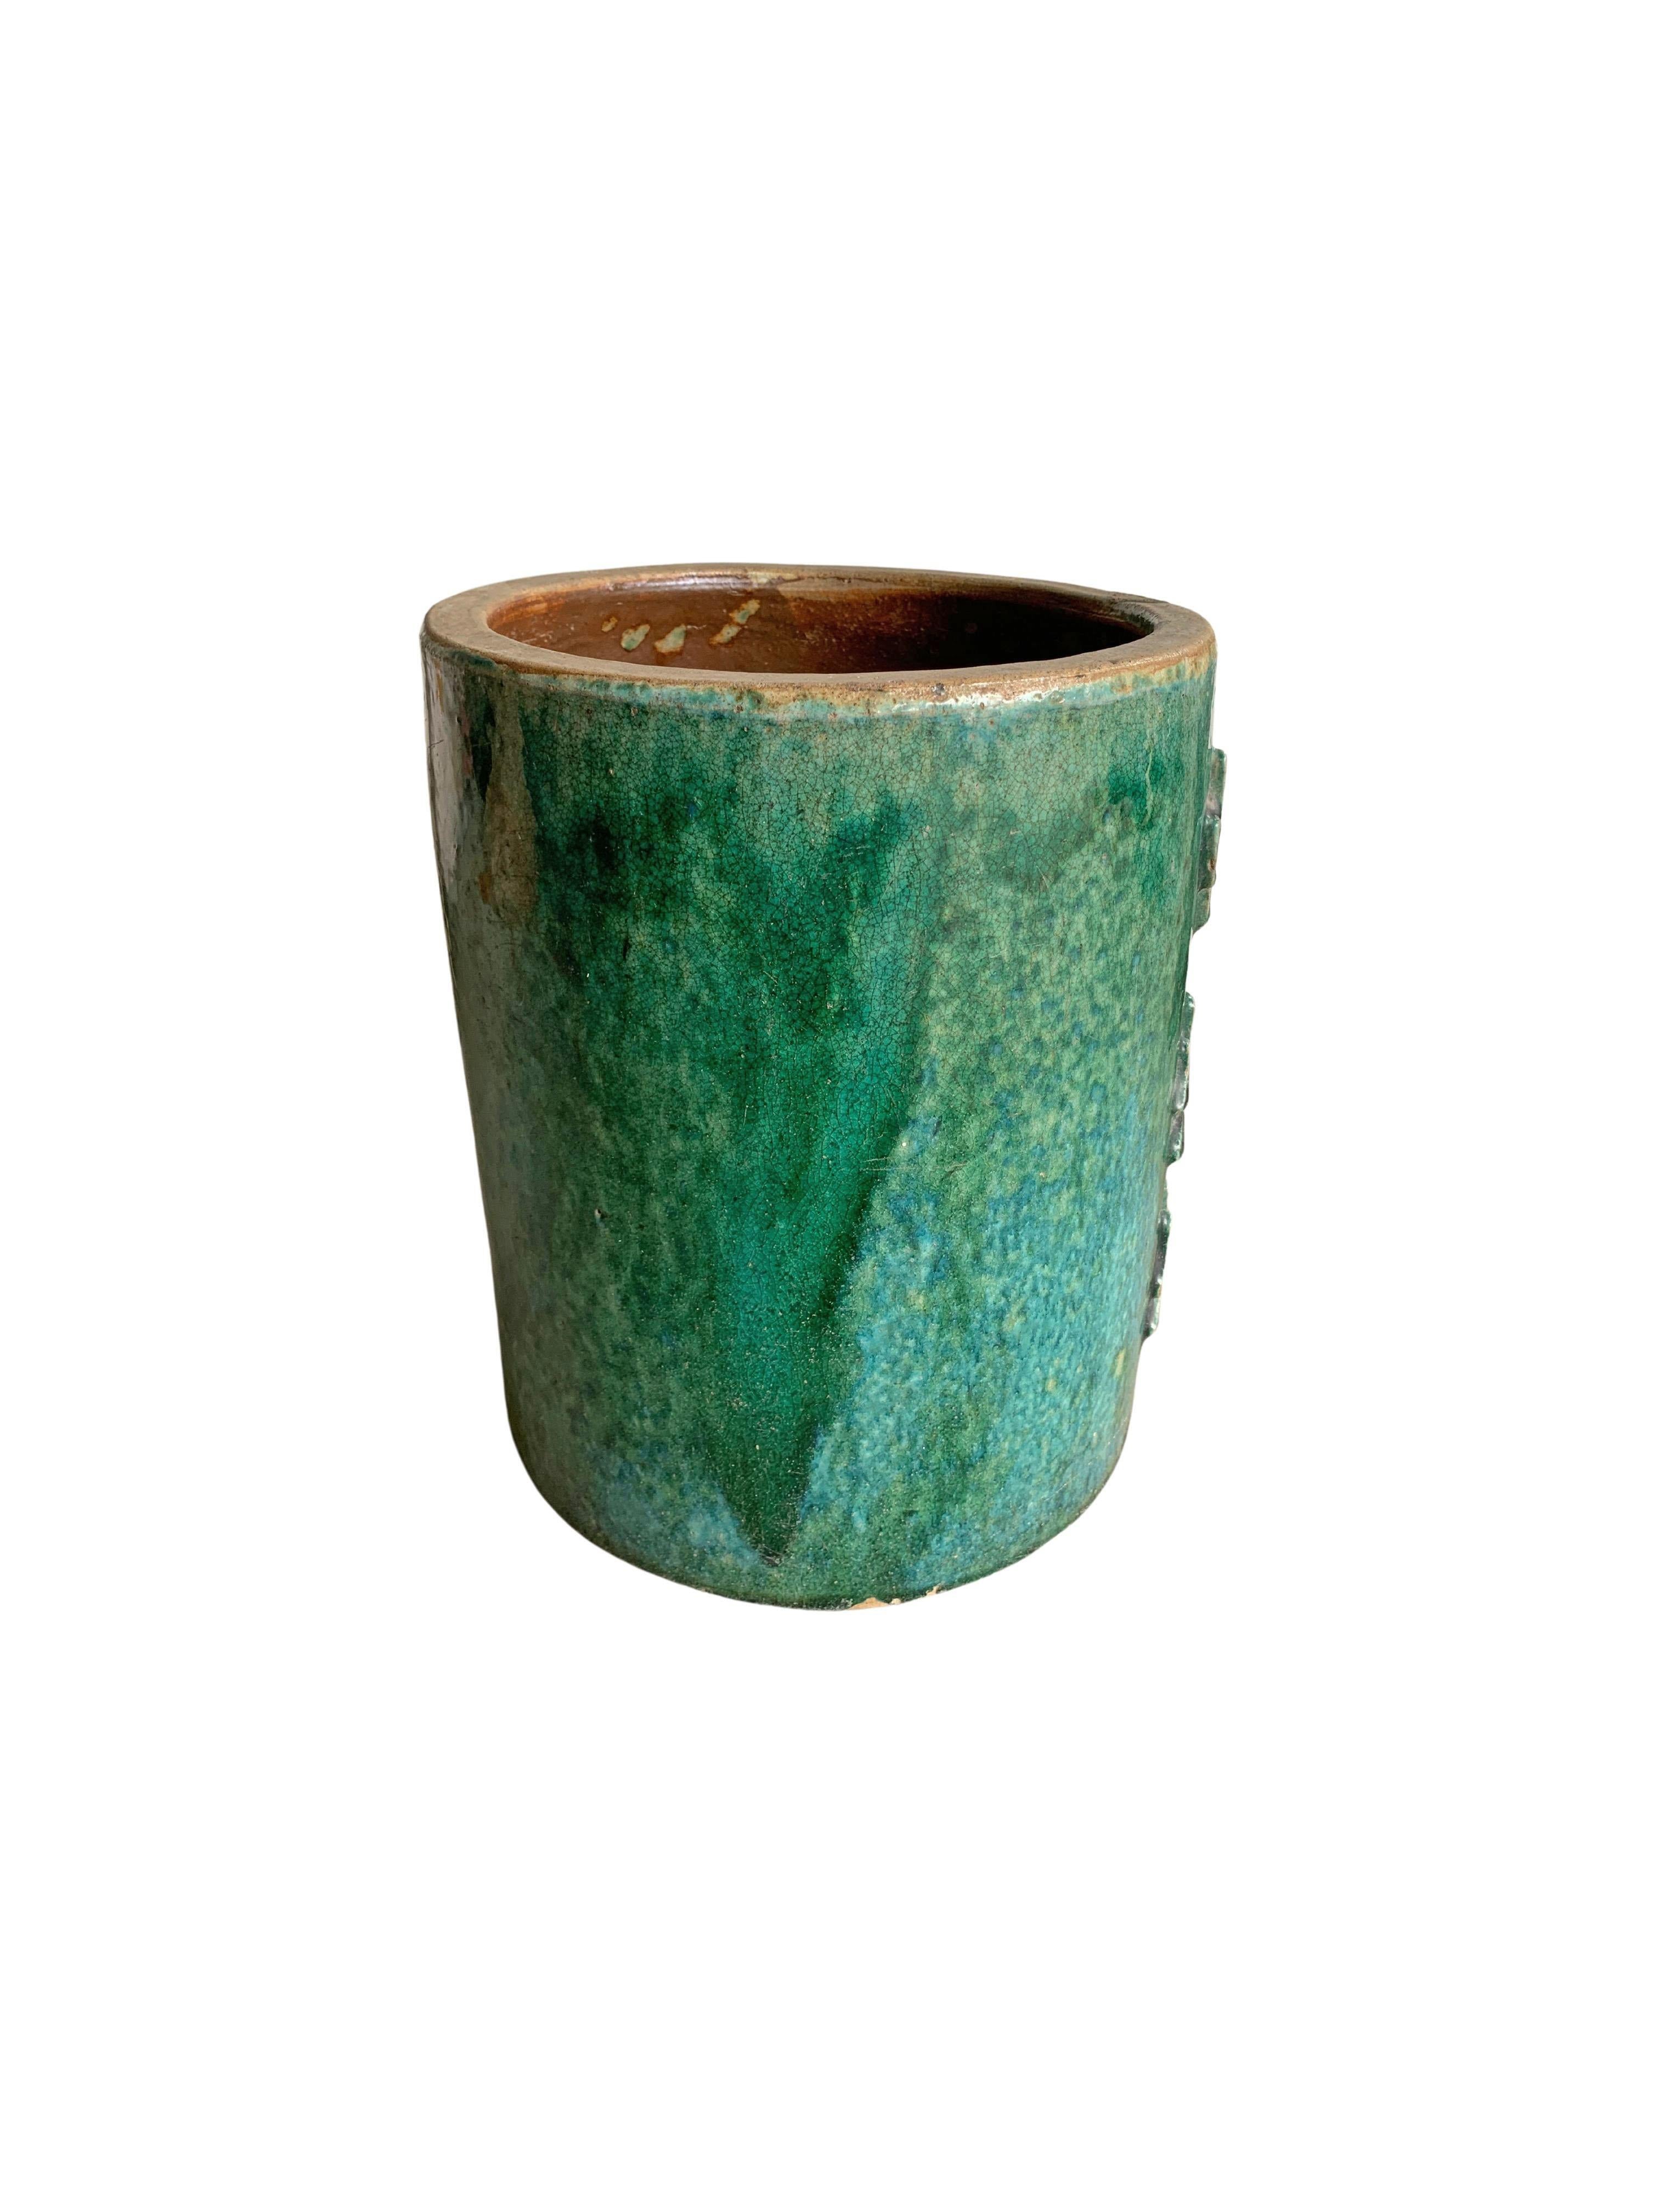 Chinese Green Glazed Ceramic Soy Sauce Storage Jar / Planter, c. 1900 In Good Condition For Sale In Jimbaran, Bali